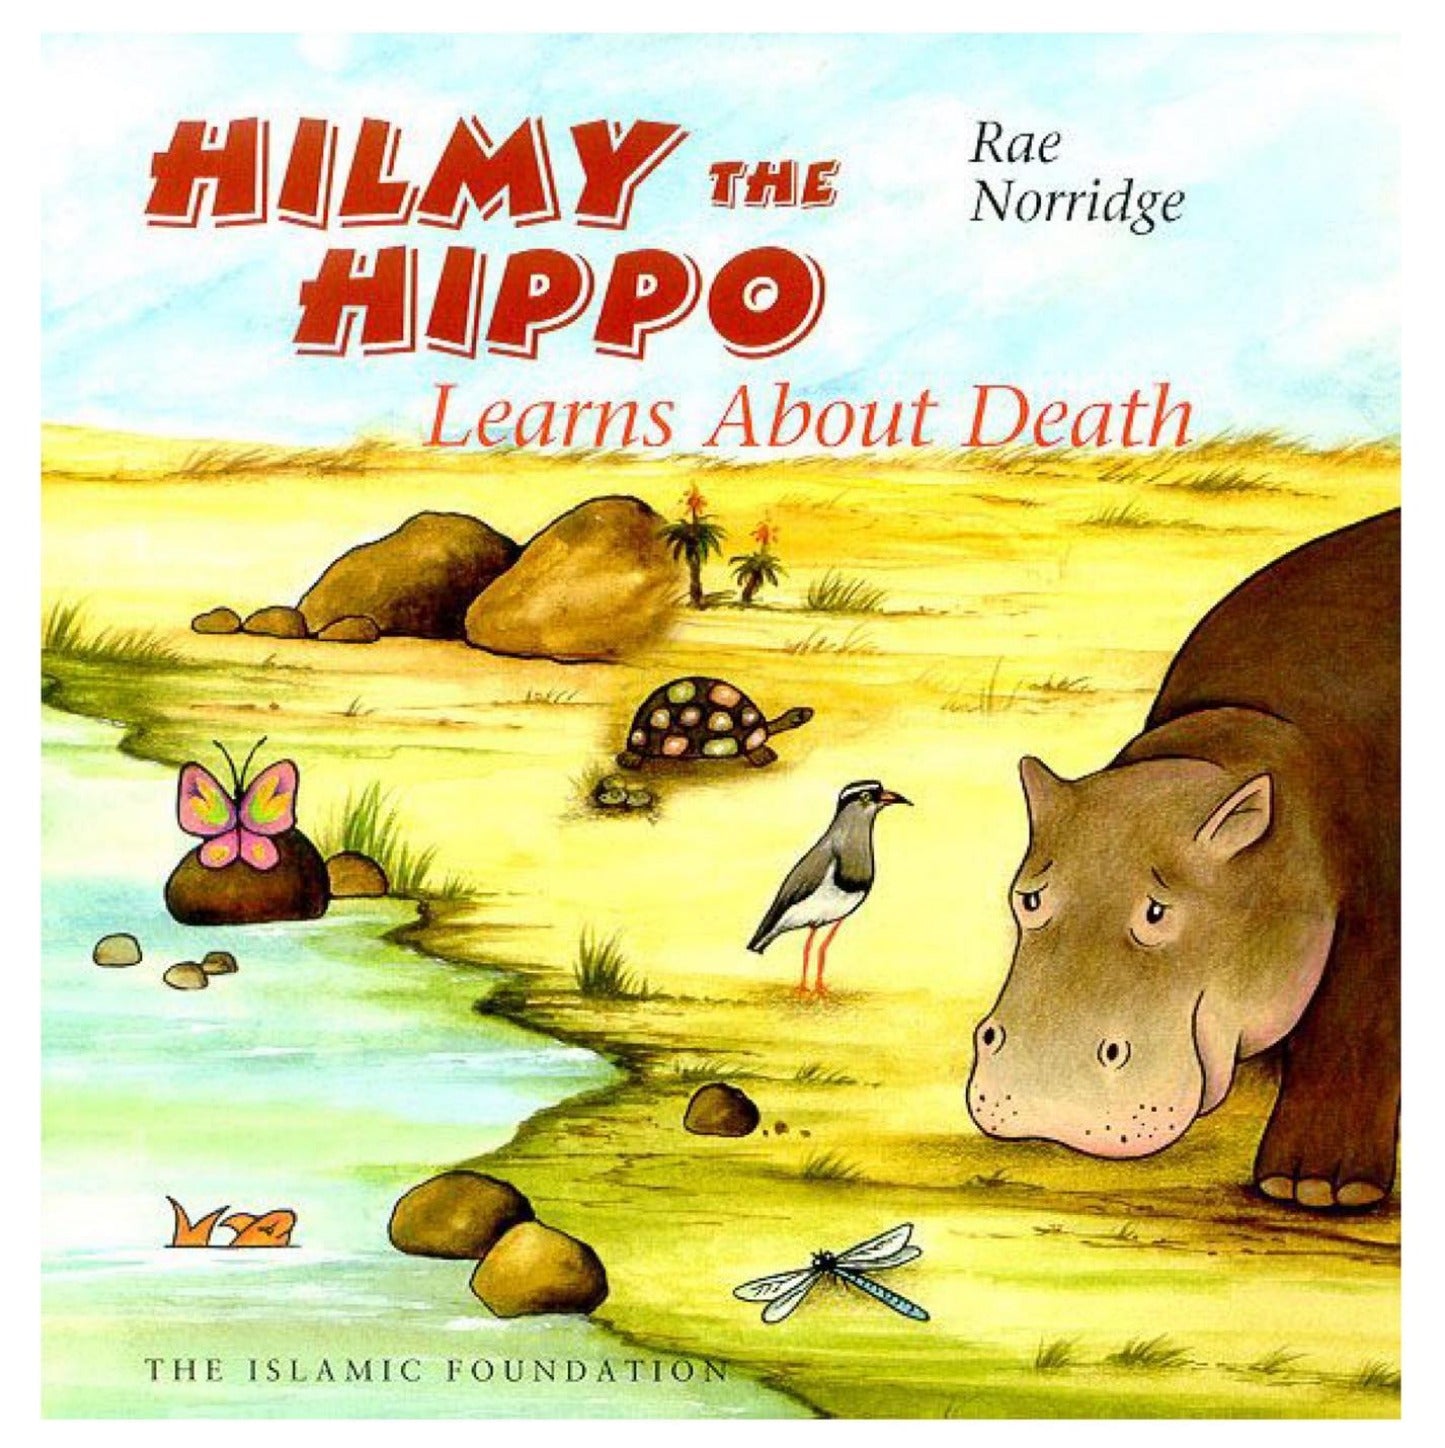 Hilmy the Hippo, Learns about Death